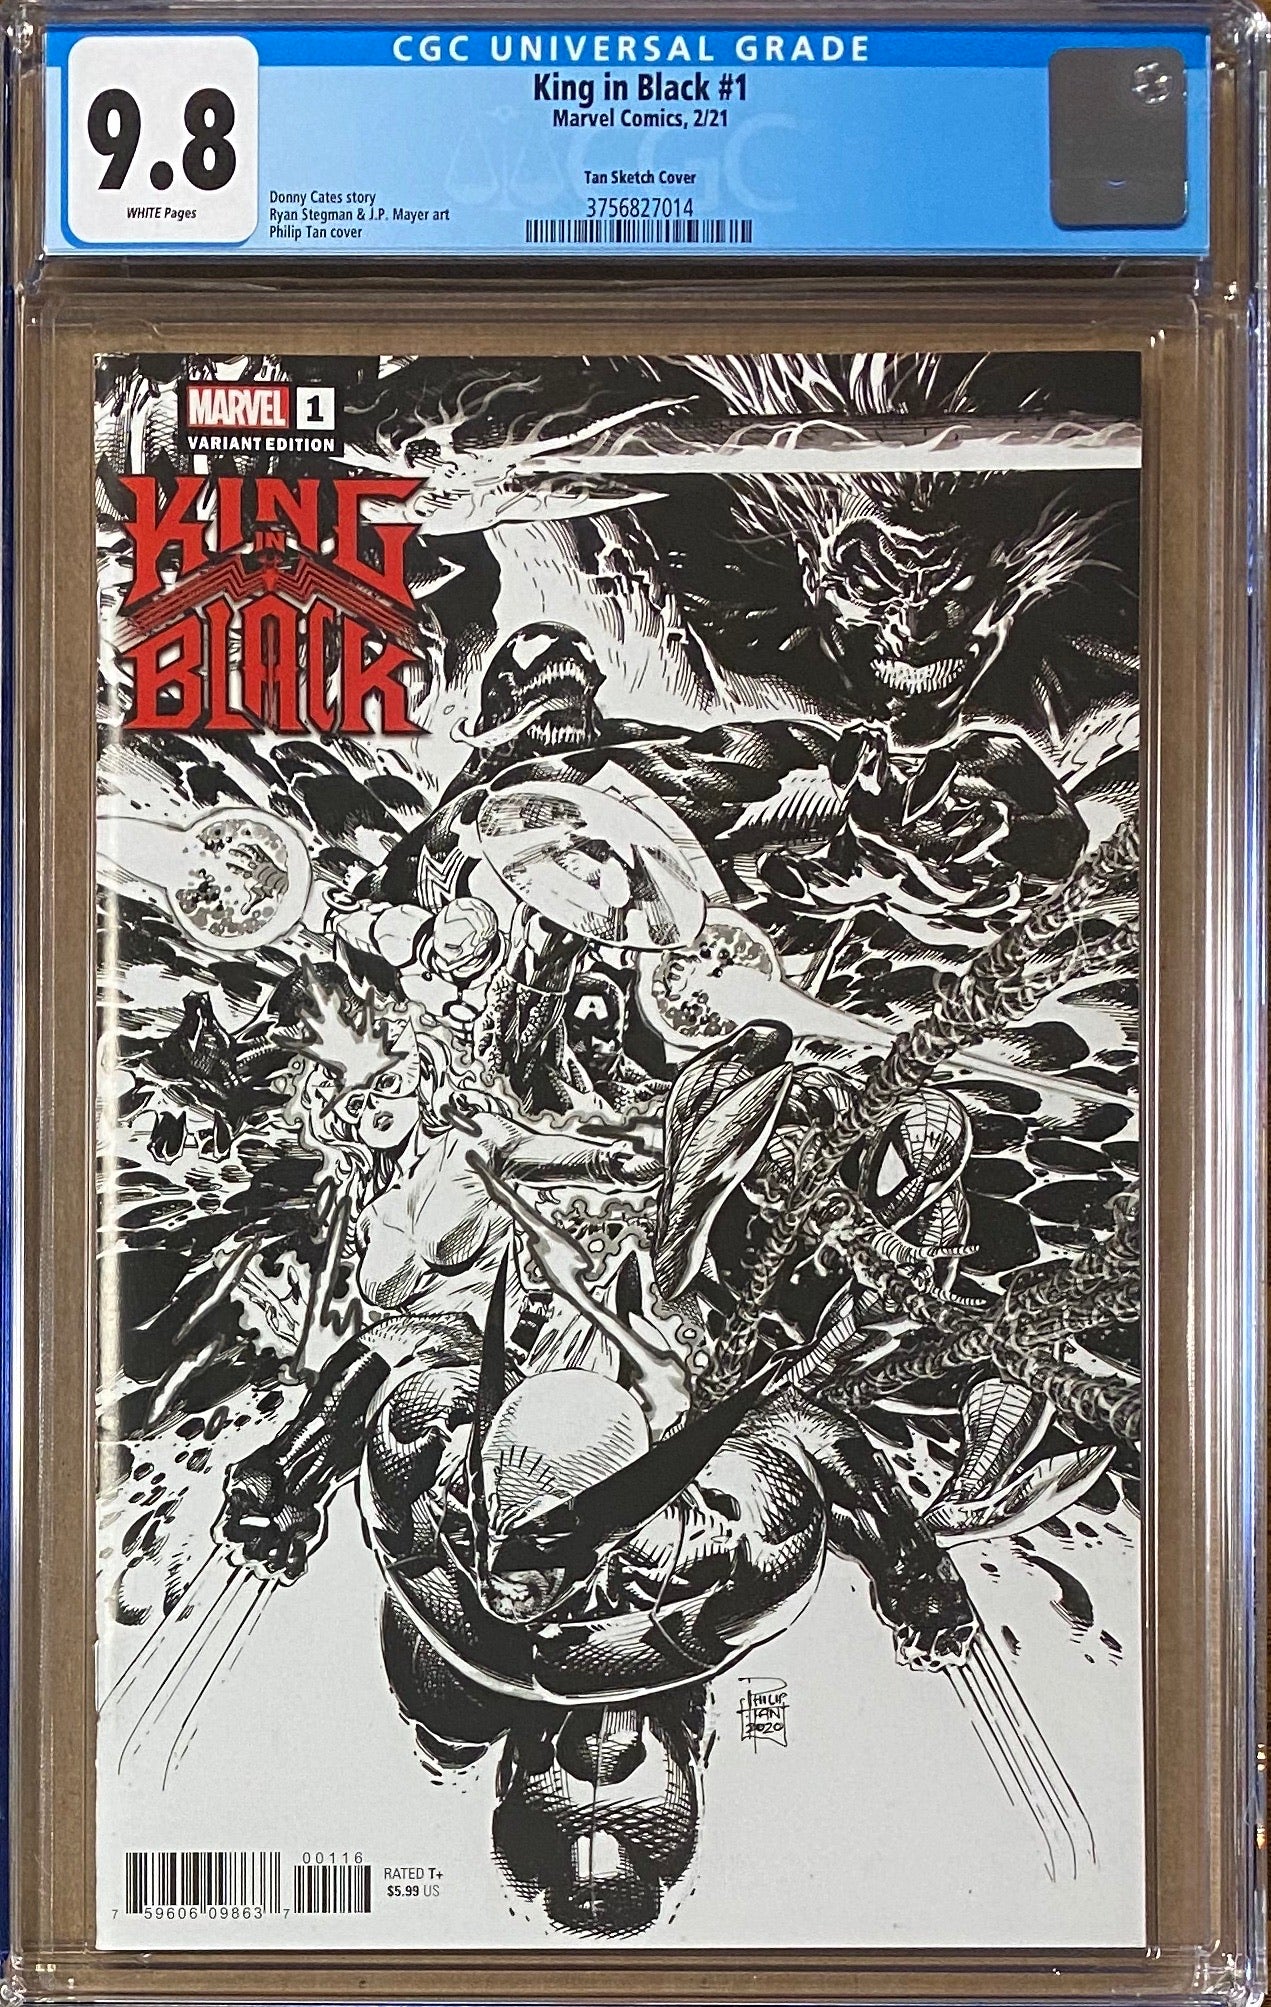 King in Black #1 Tan Launch Sketch Retailer Incentive Variant CGC 9.8